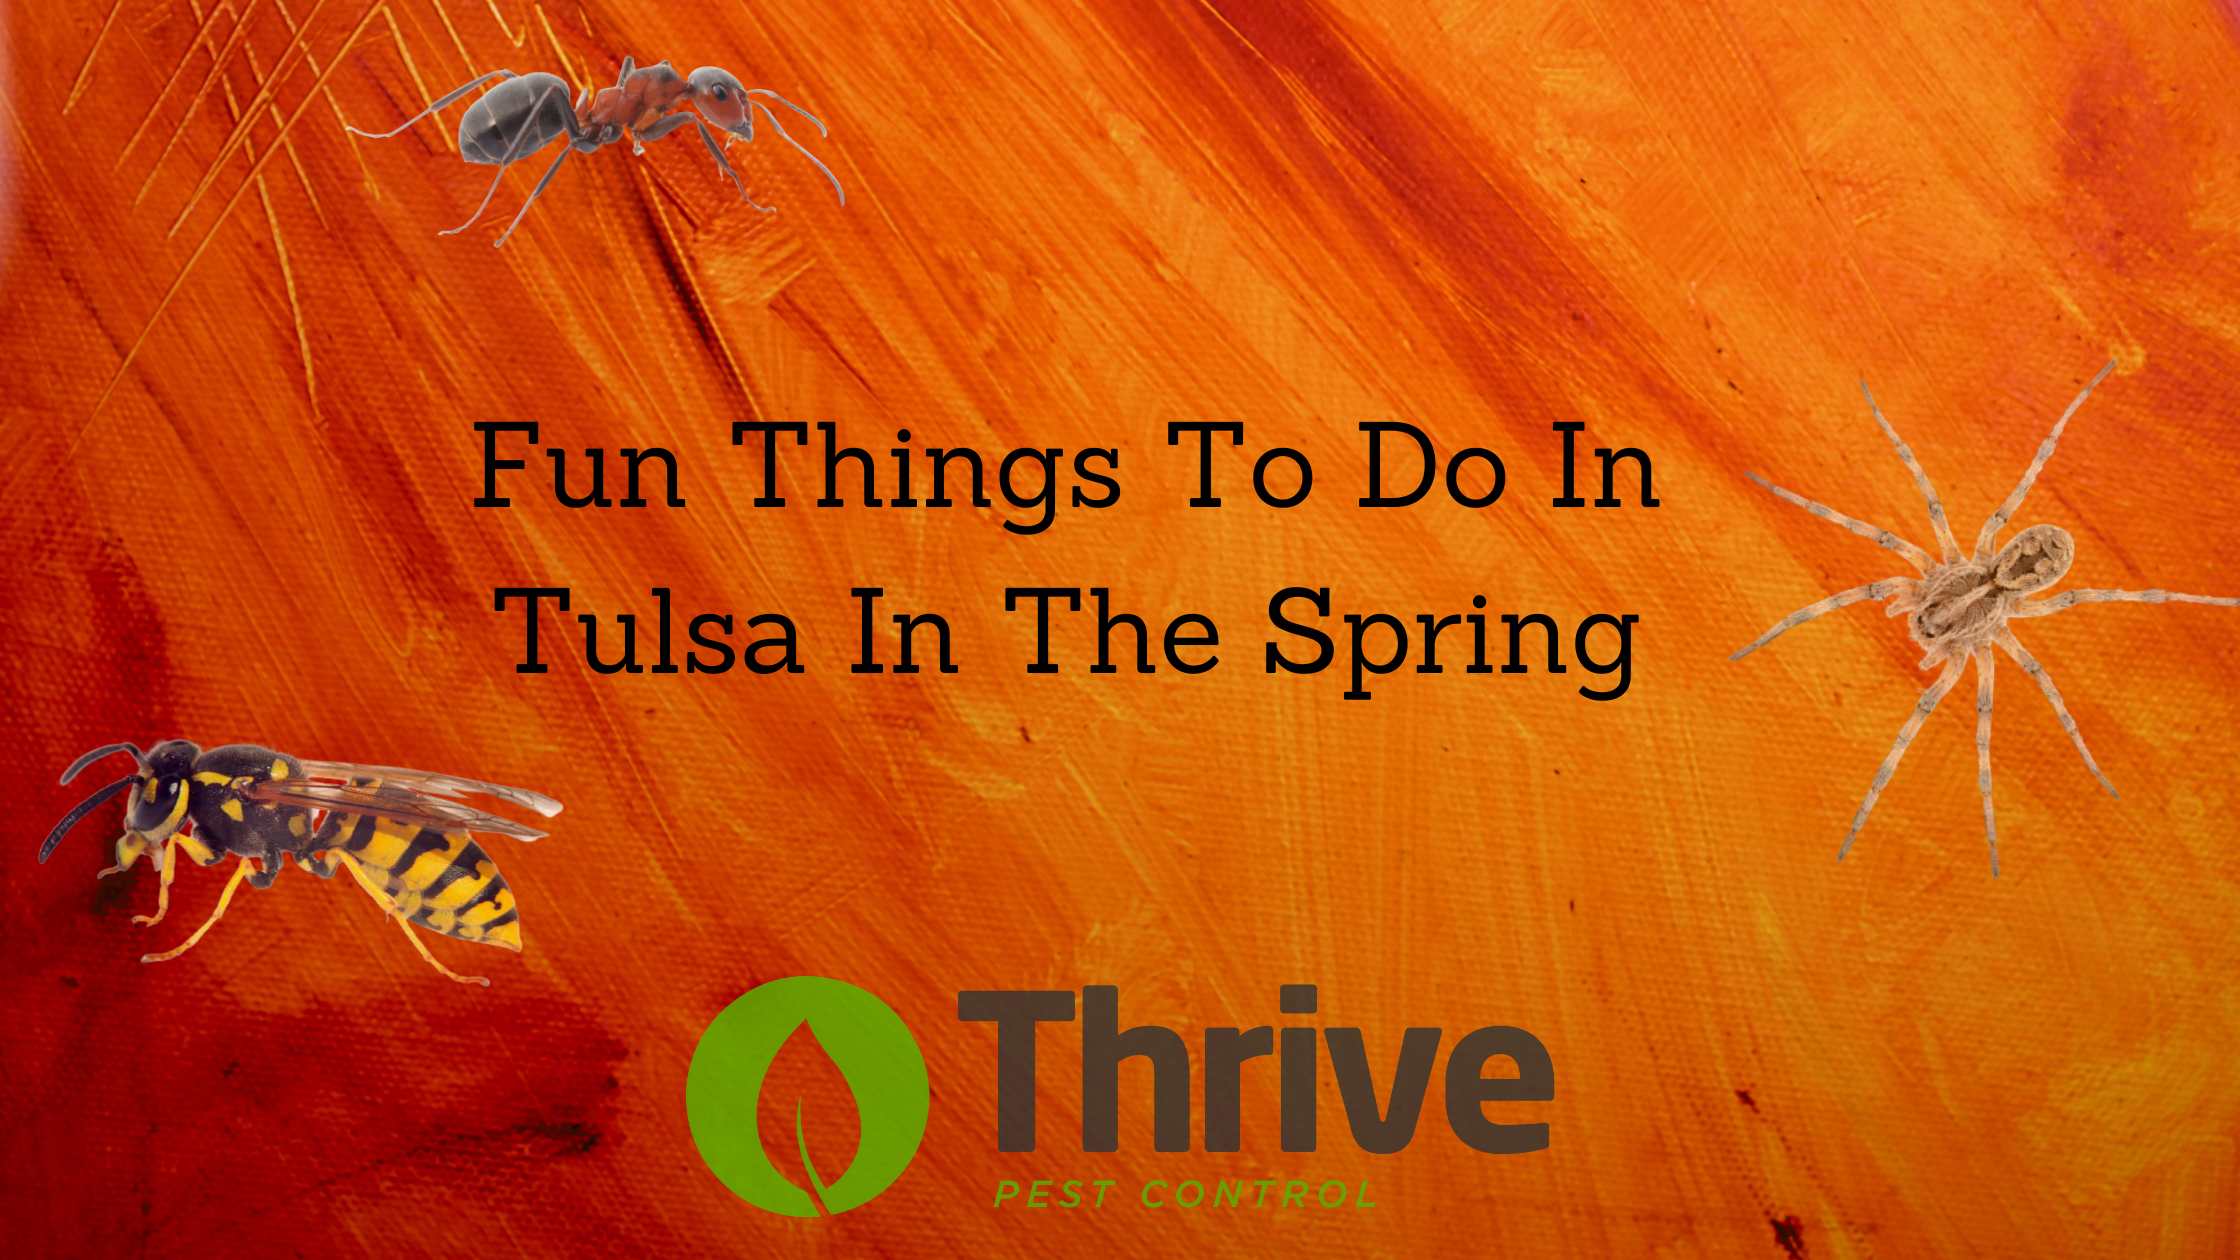 Fun Things To Do In Tulsa In The Spring